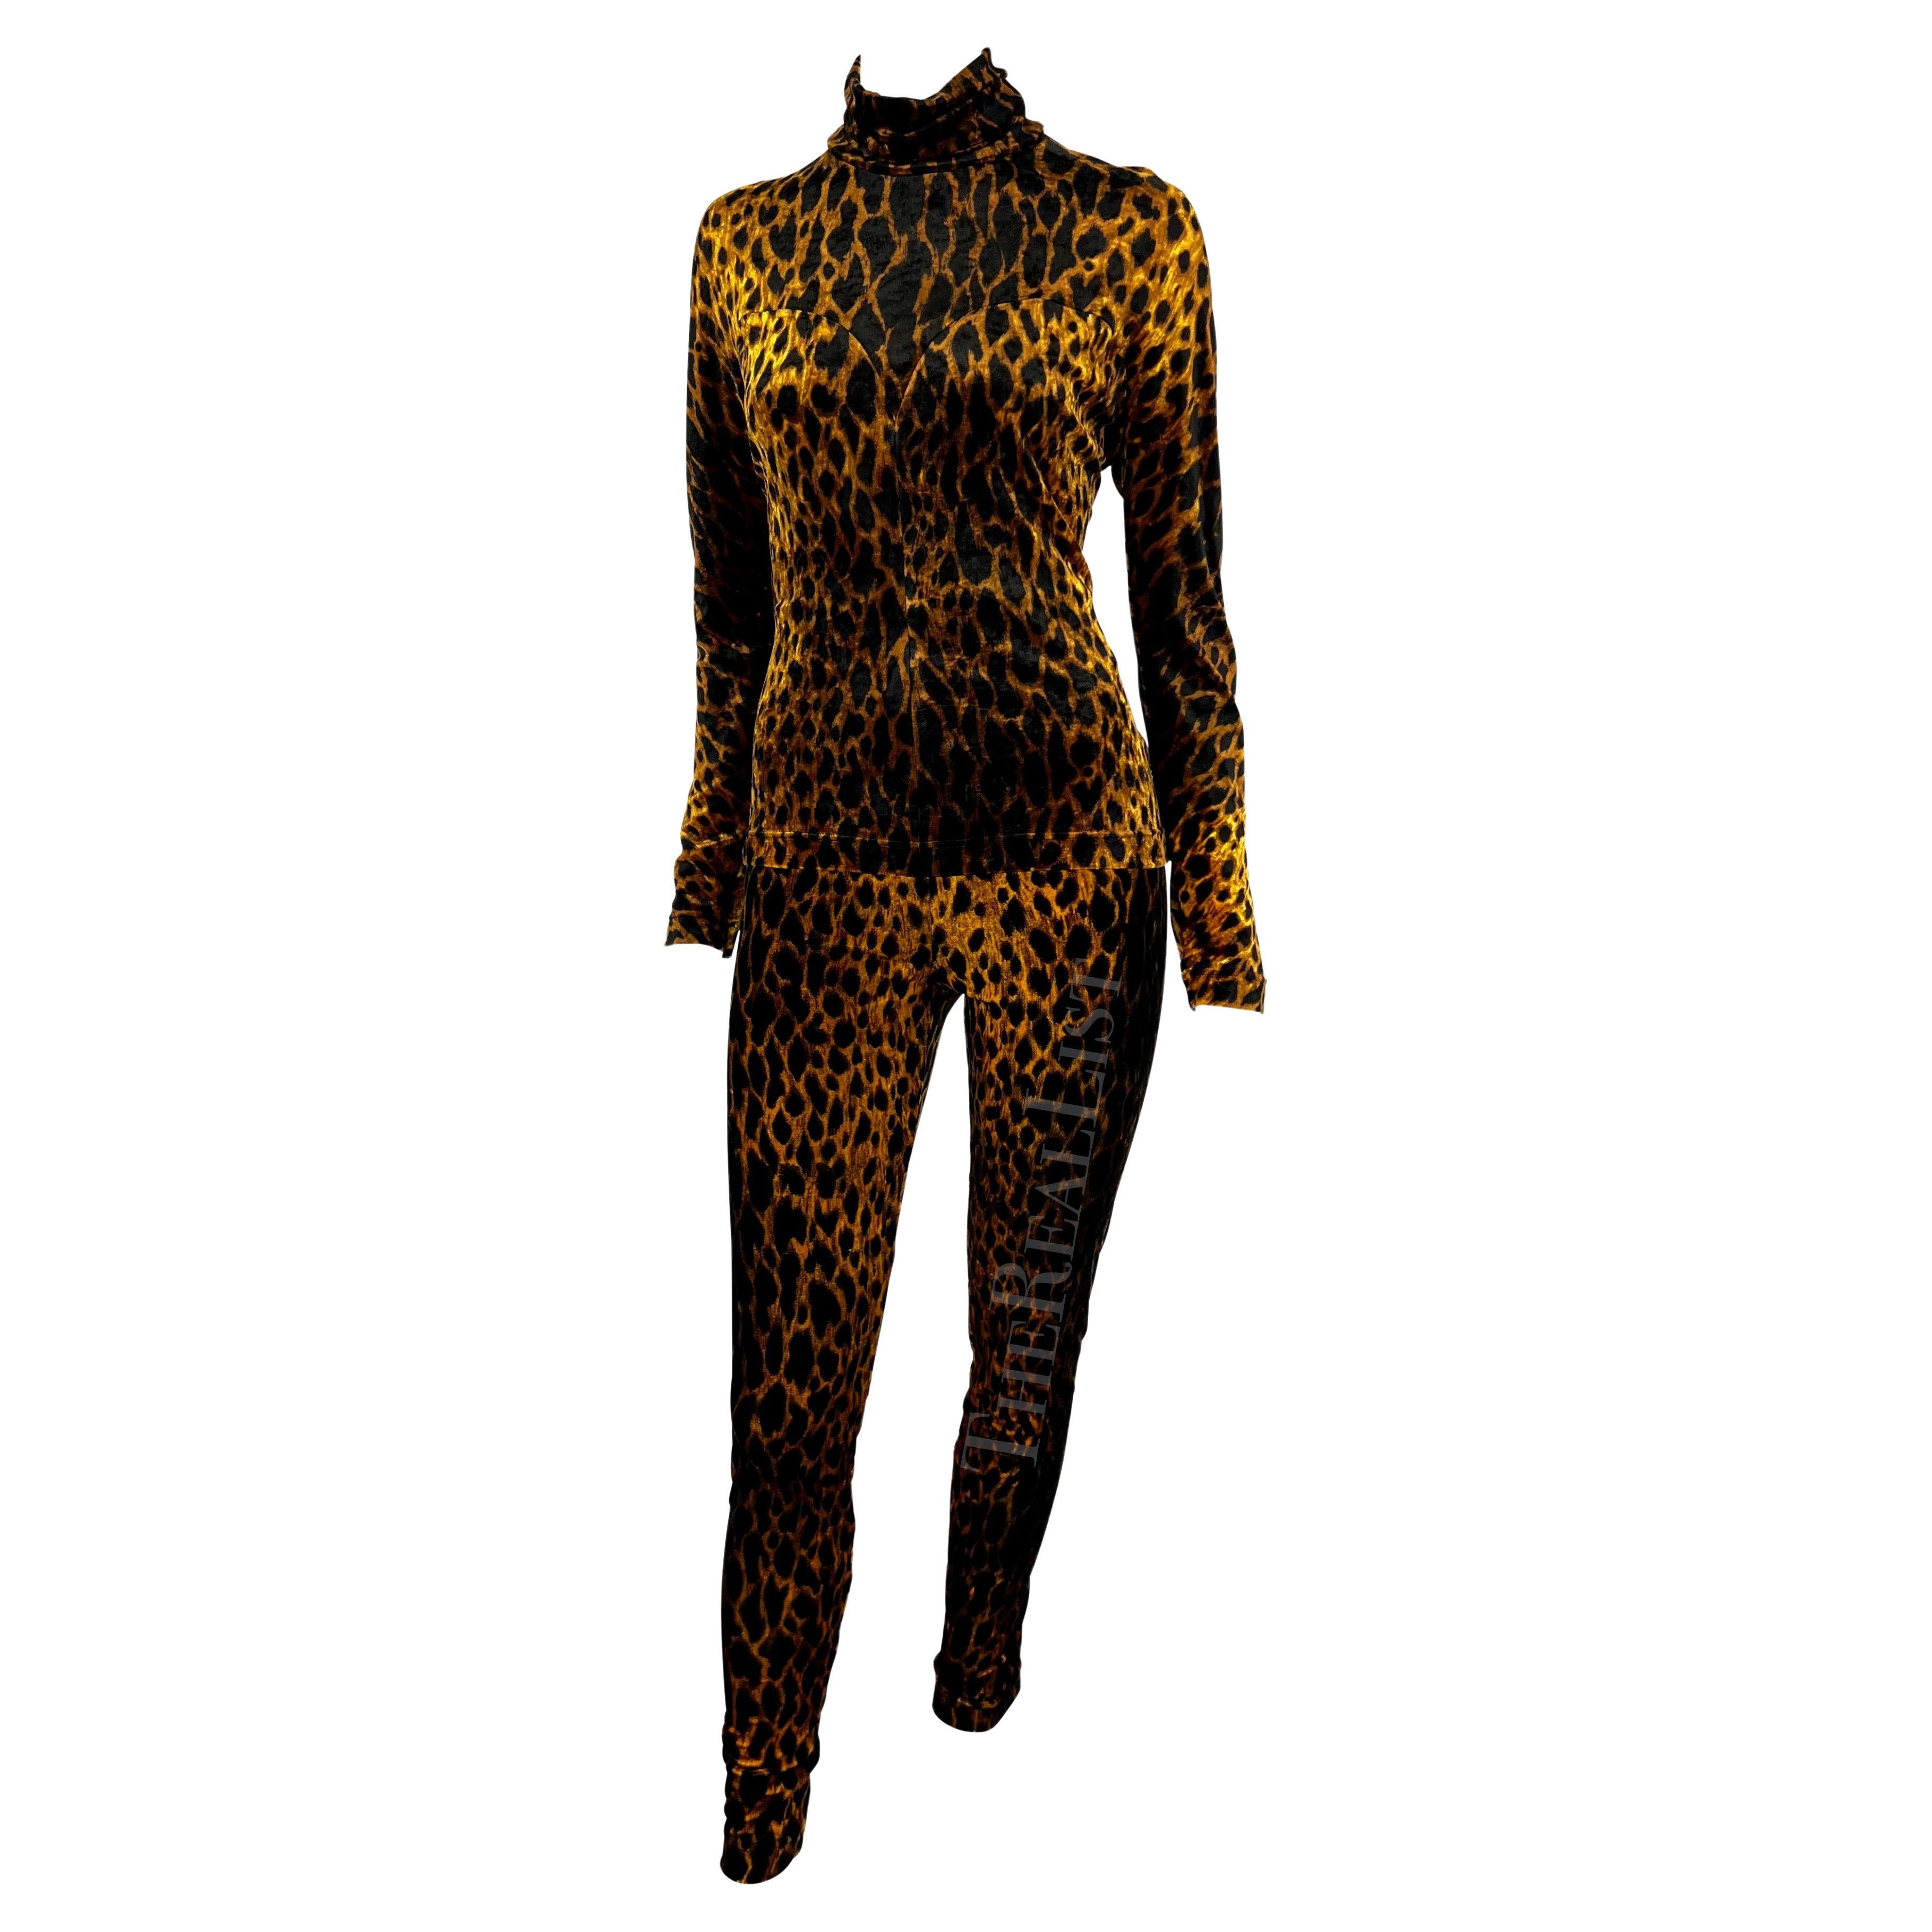 Presenting an incredible velvet cheetah print Gianni Versace set, designed by Gianni Versace. From the Fall/Winter 1992 collection, this set is comprised of a pair of velvet tights and a matching mock neck blouse. The top from this form-fitting set